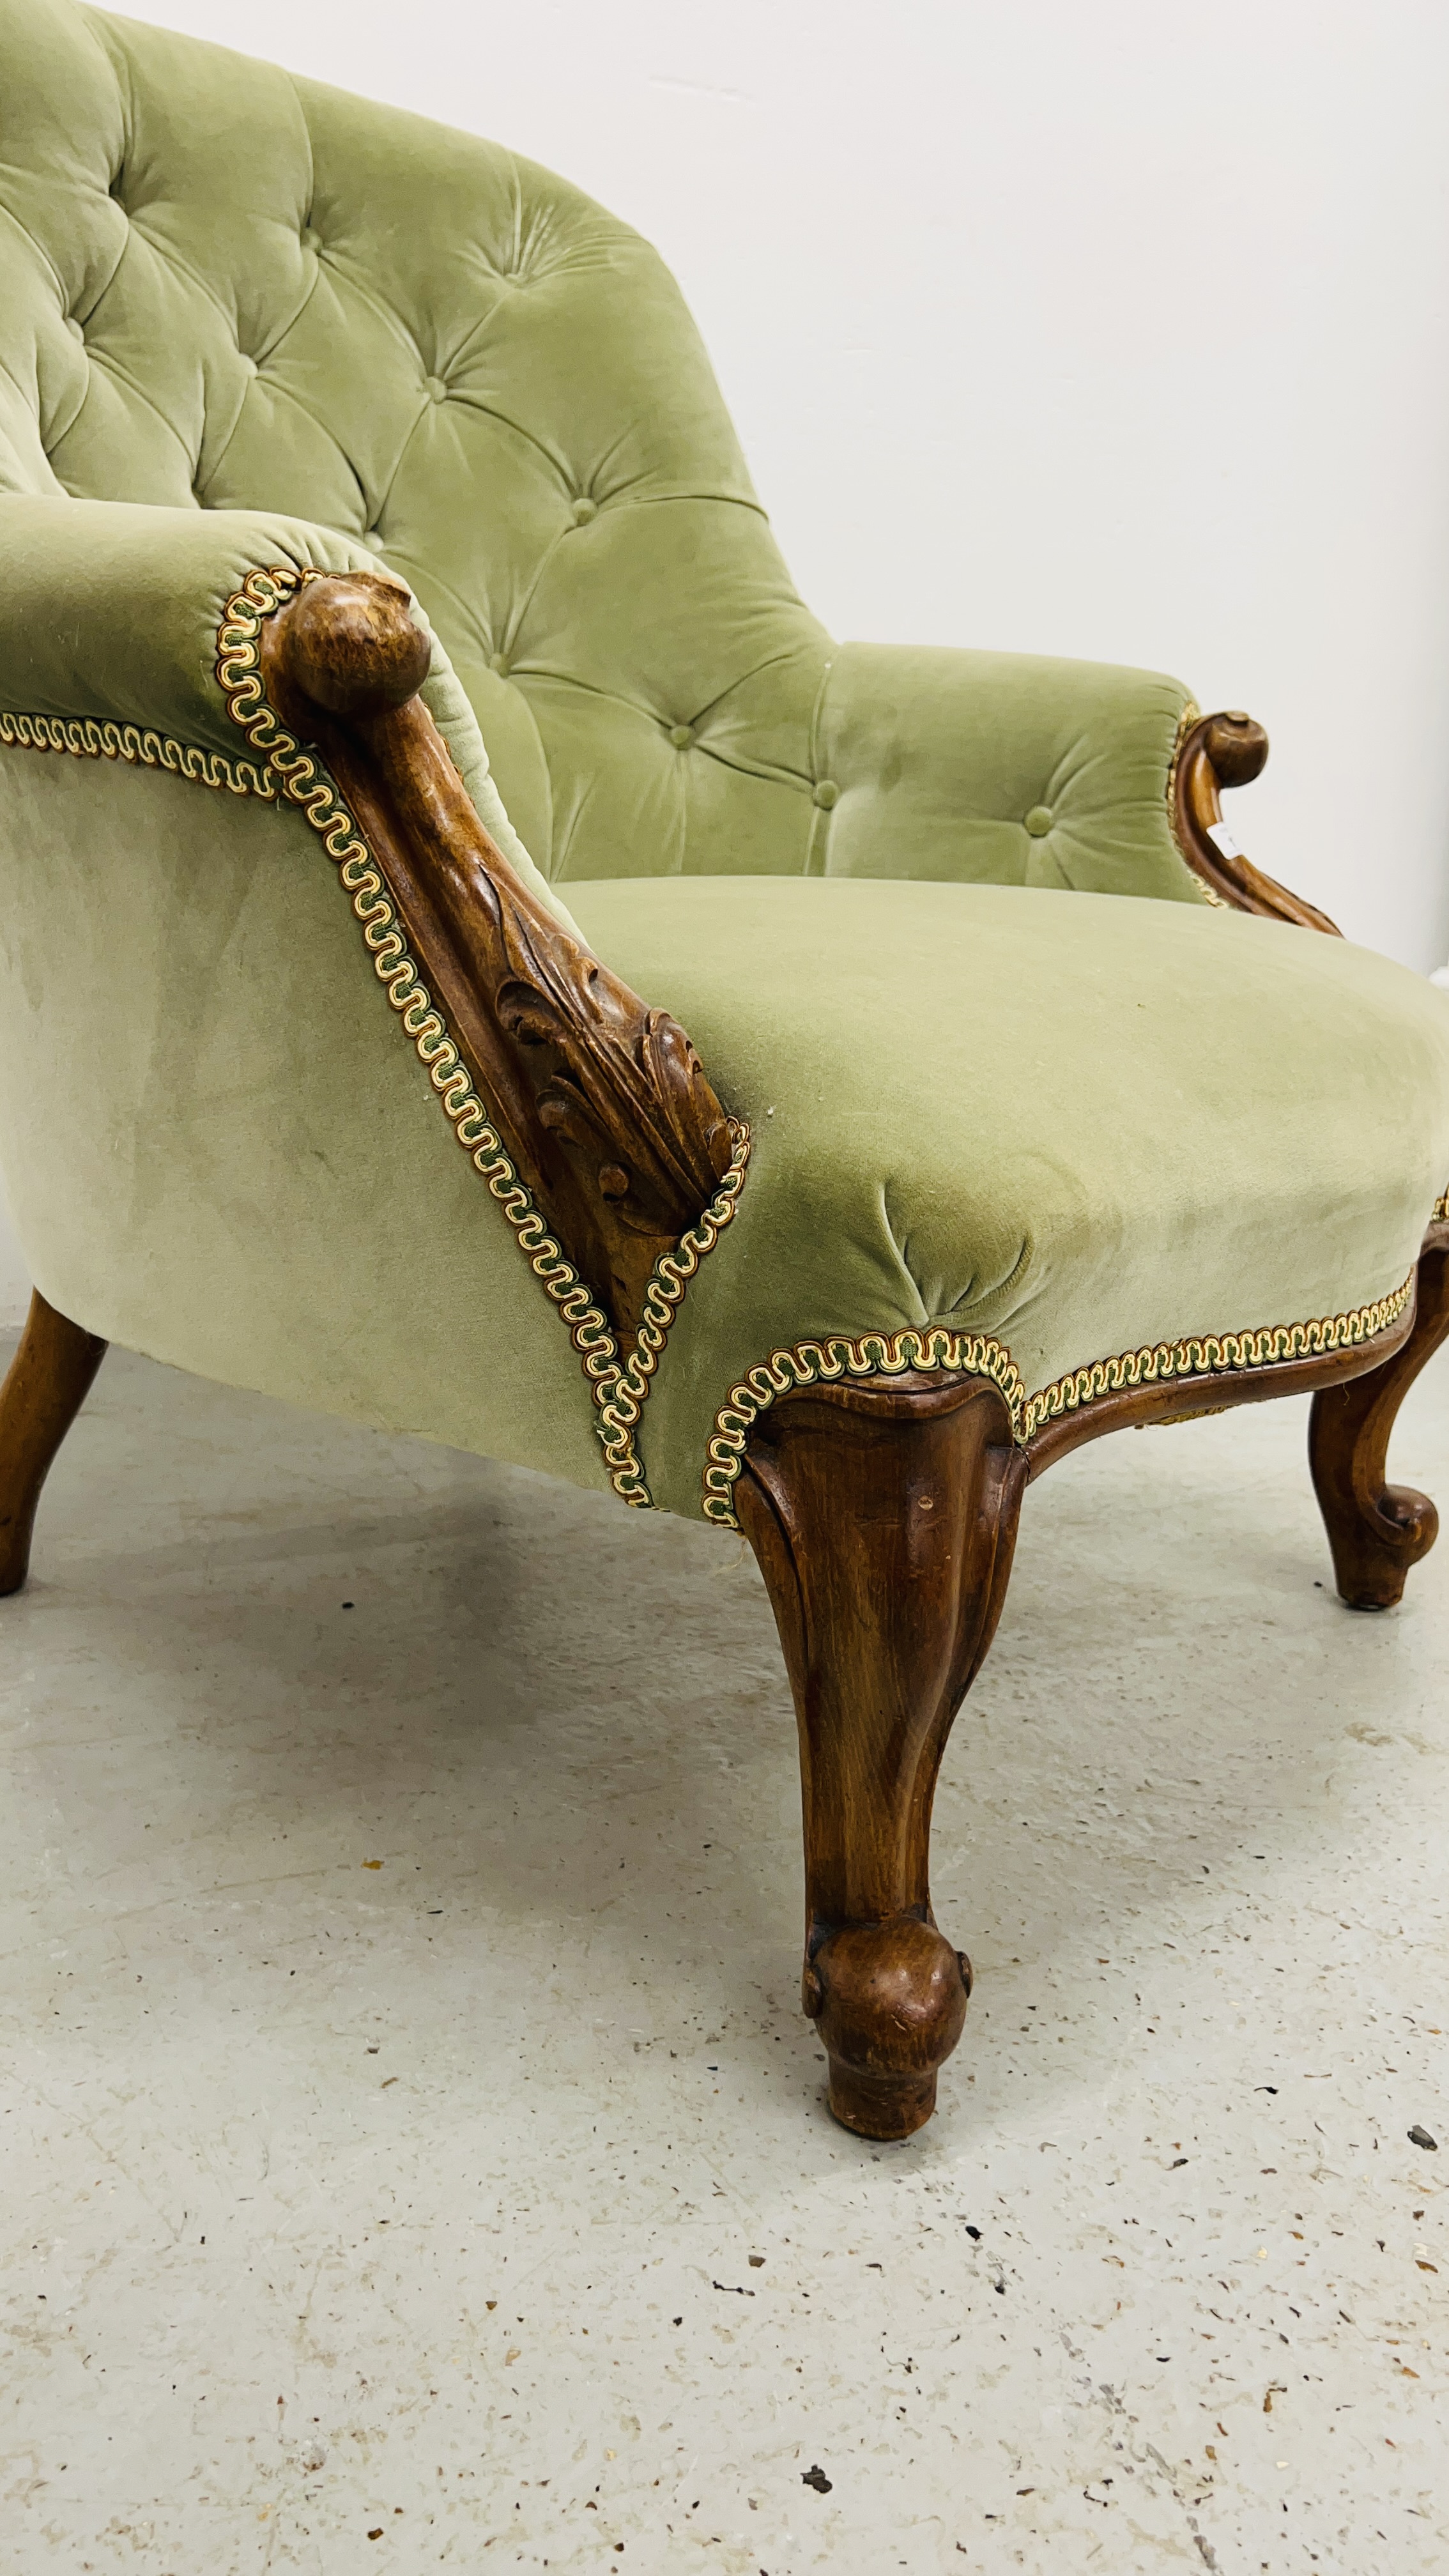 A VICTORIAN BUTTON BACK NURSING CHAIR - Image 9 of 11